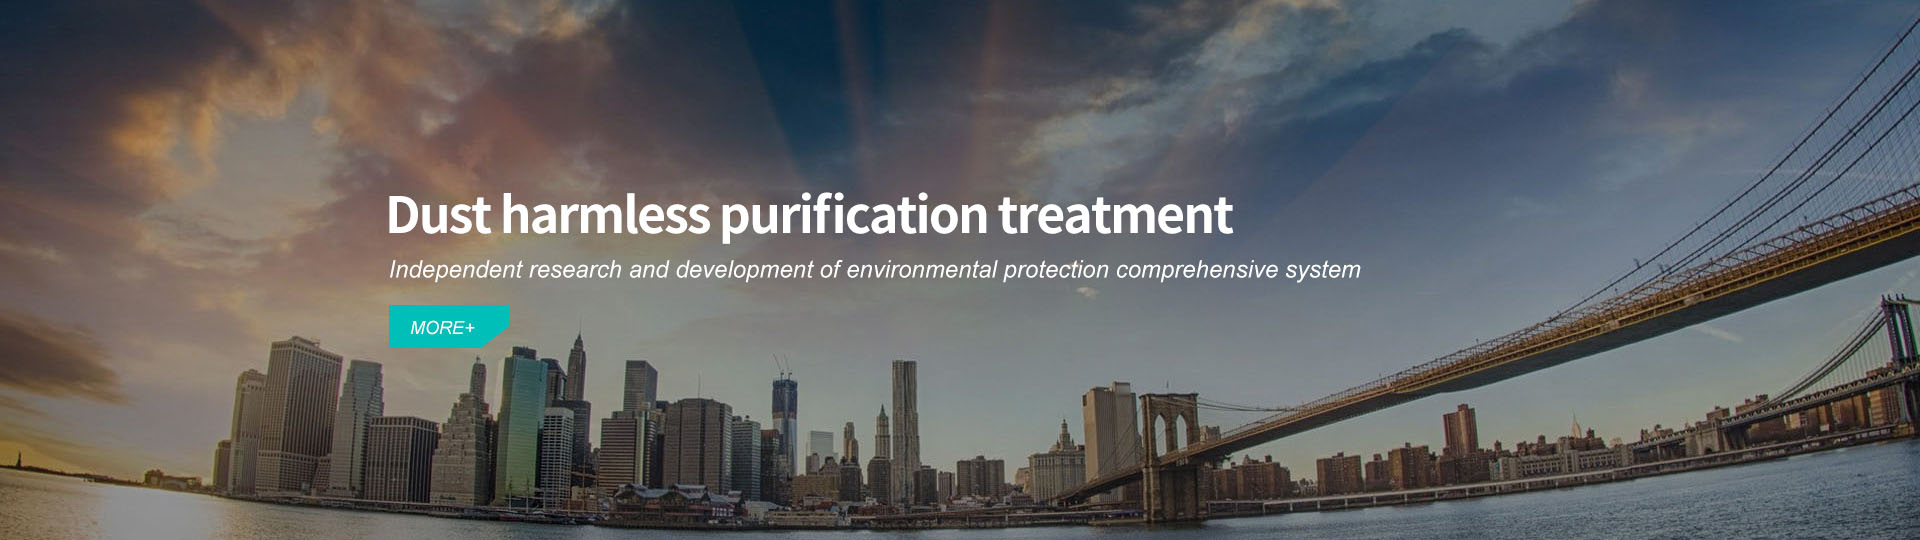 Dust harmless purification treatment - independent research and development of environmental protection comprehensive system